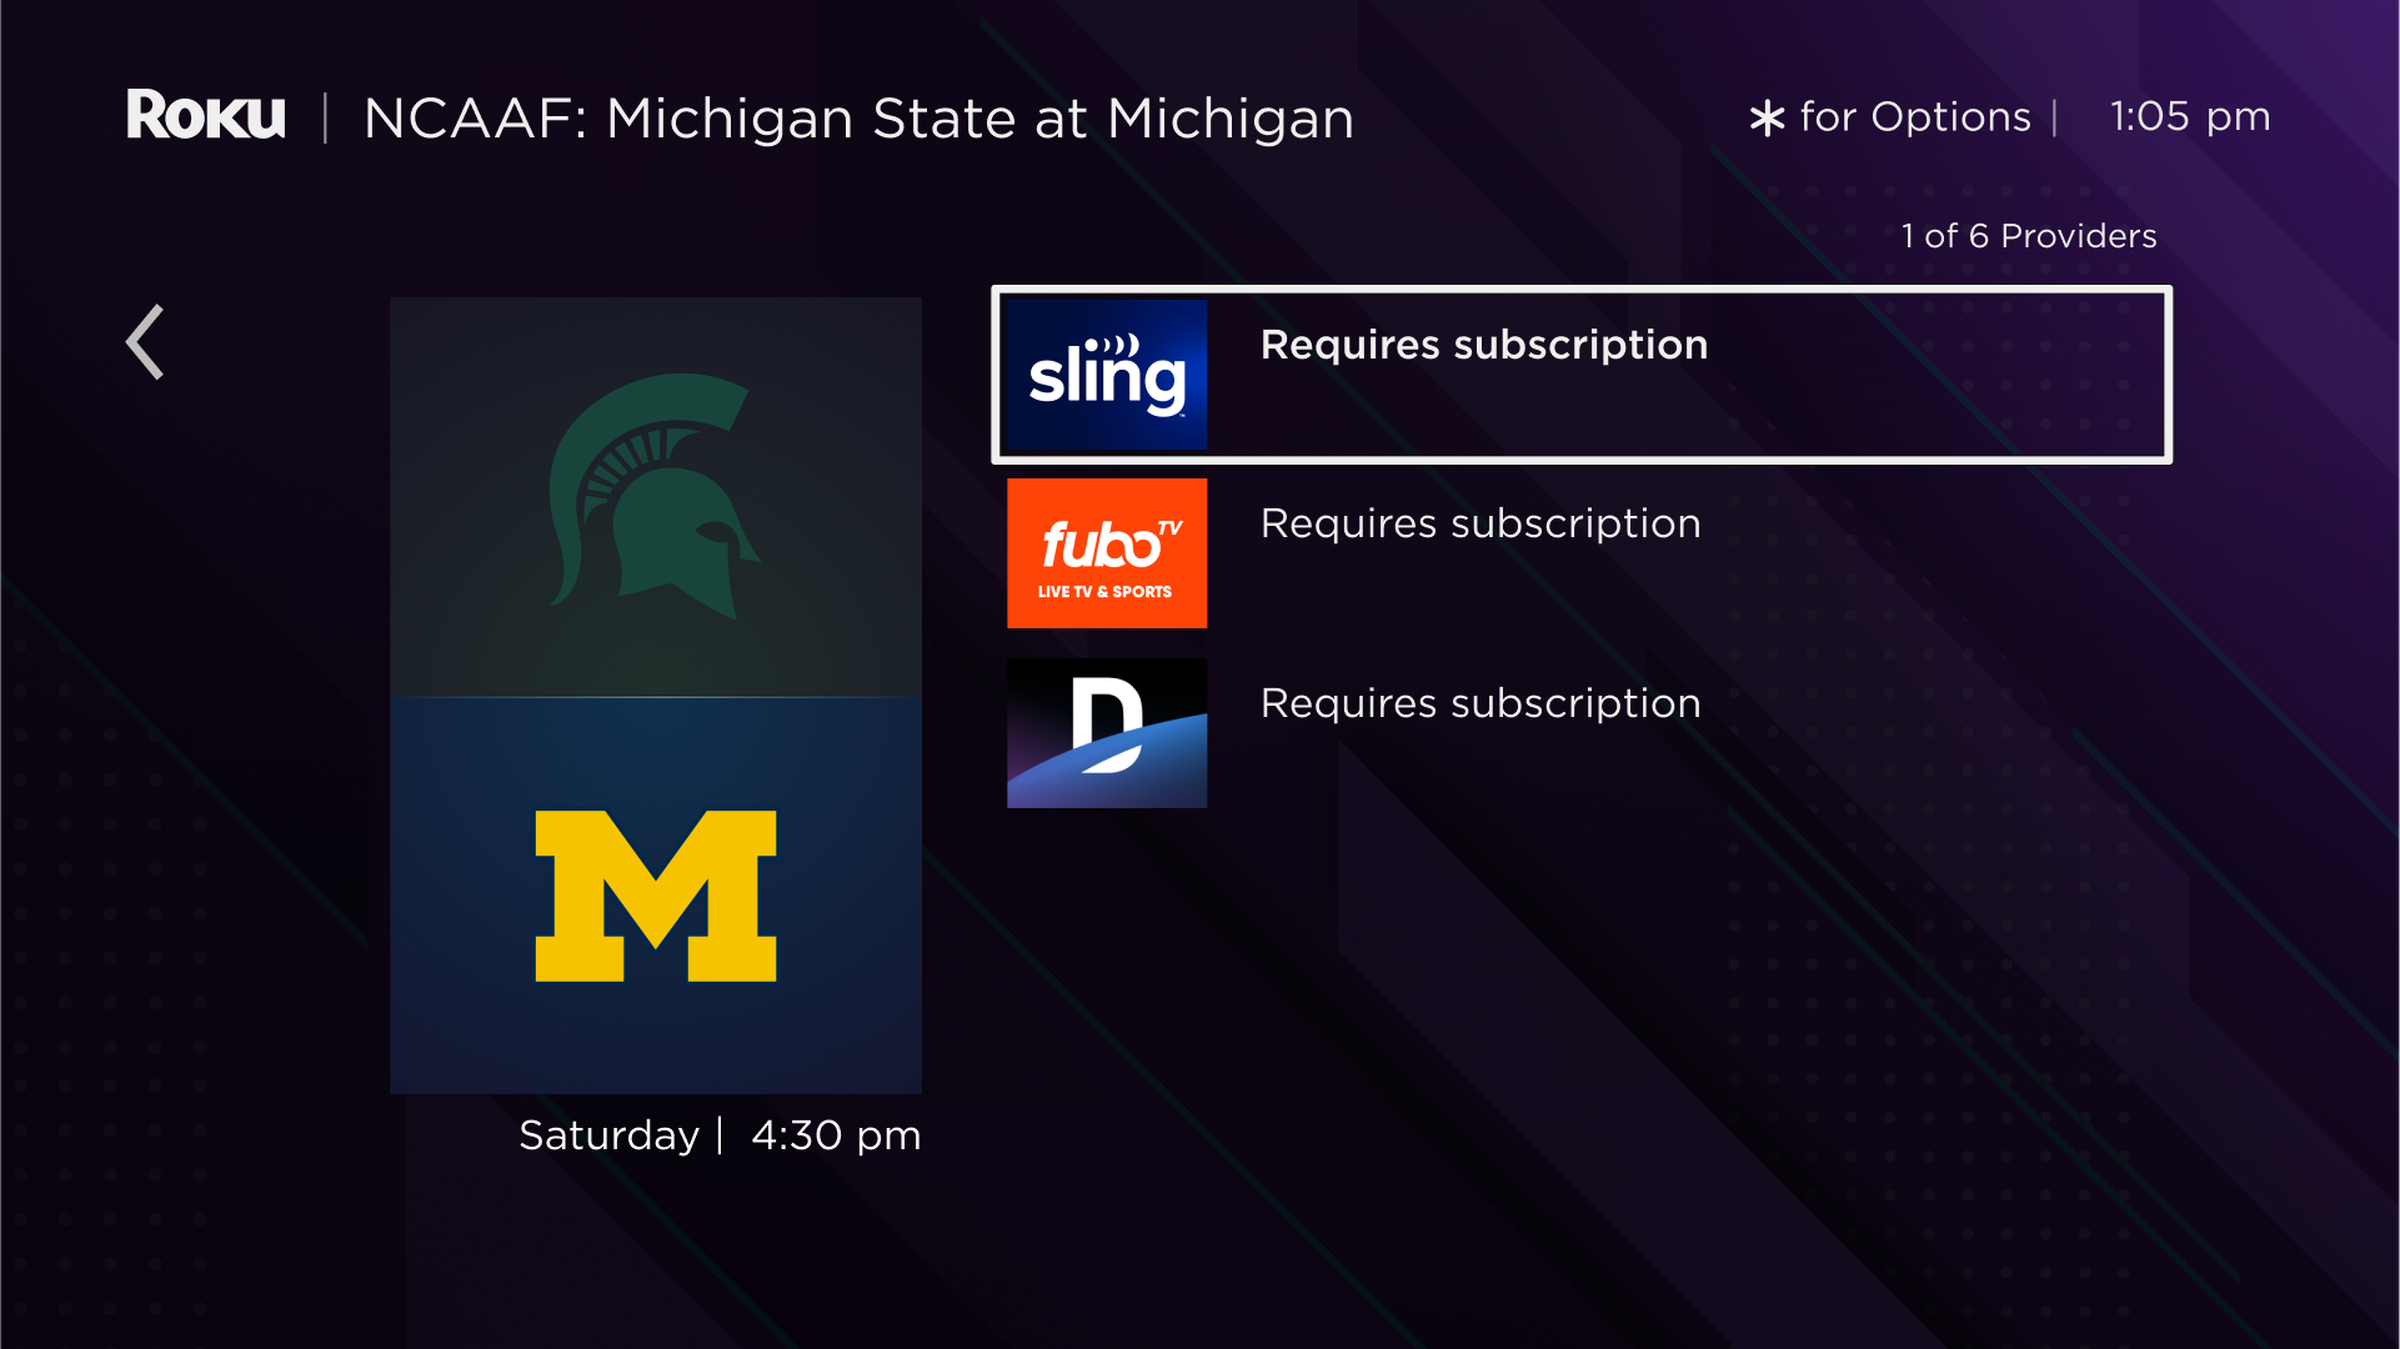 A screenshot of Roku OS displaying different options for streaming a college football game.